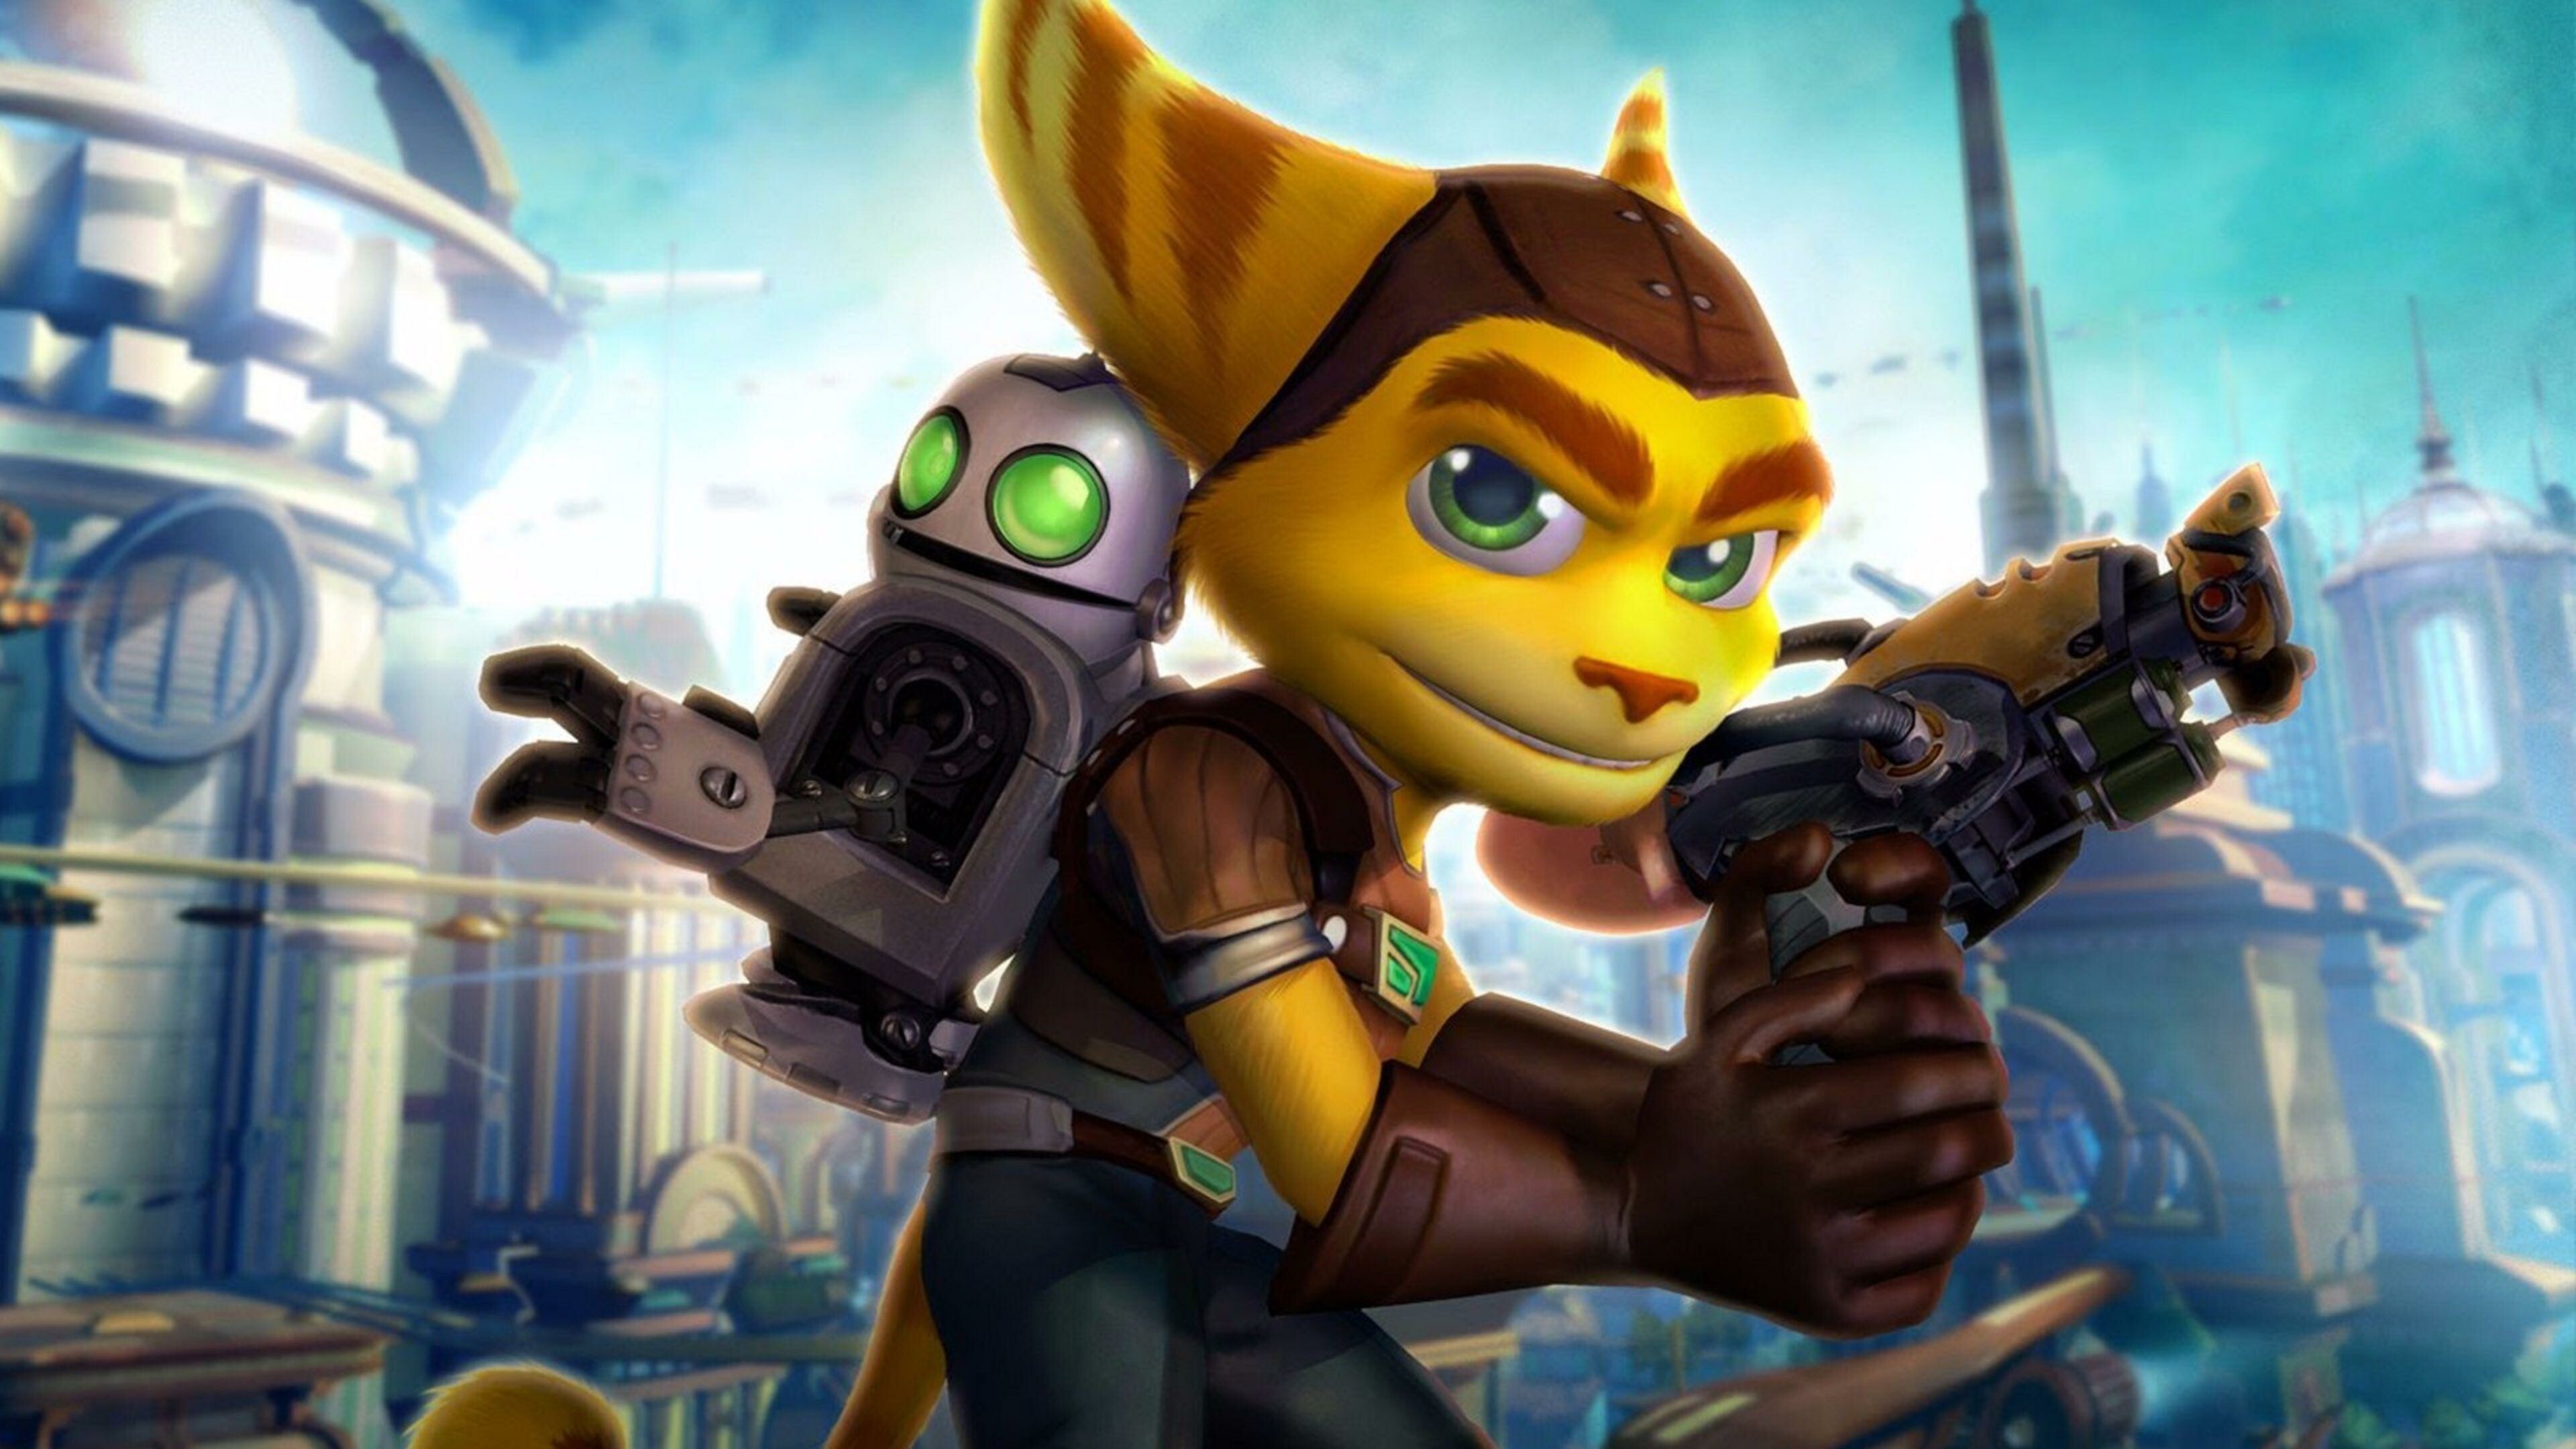 Ratchet and Clank: Rift Apart: A fox-like character, Accompanied by his robotic friend who is hung on his back. 3840x2160 4K Wallpaper.